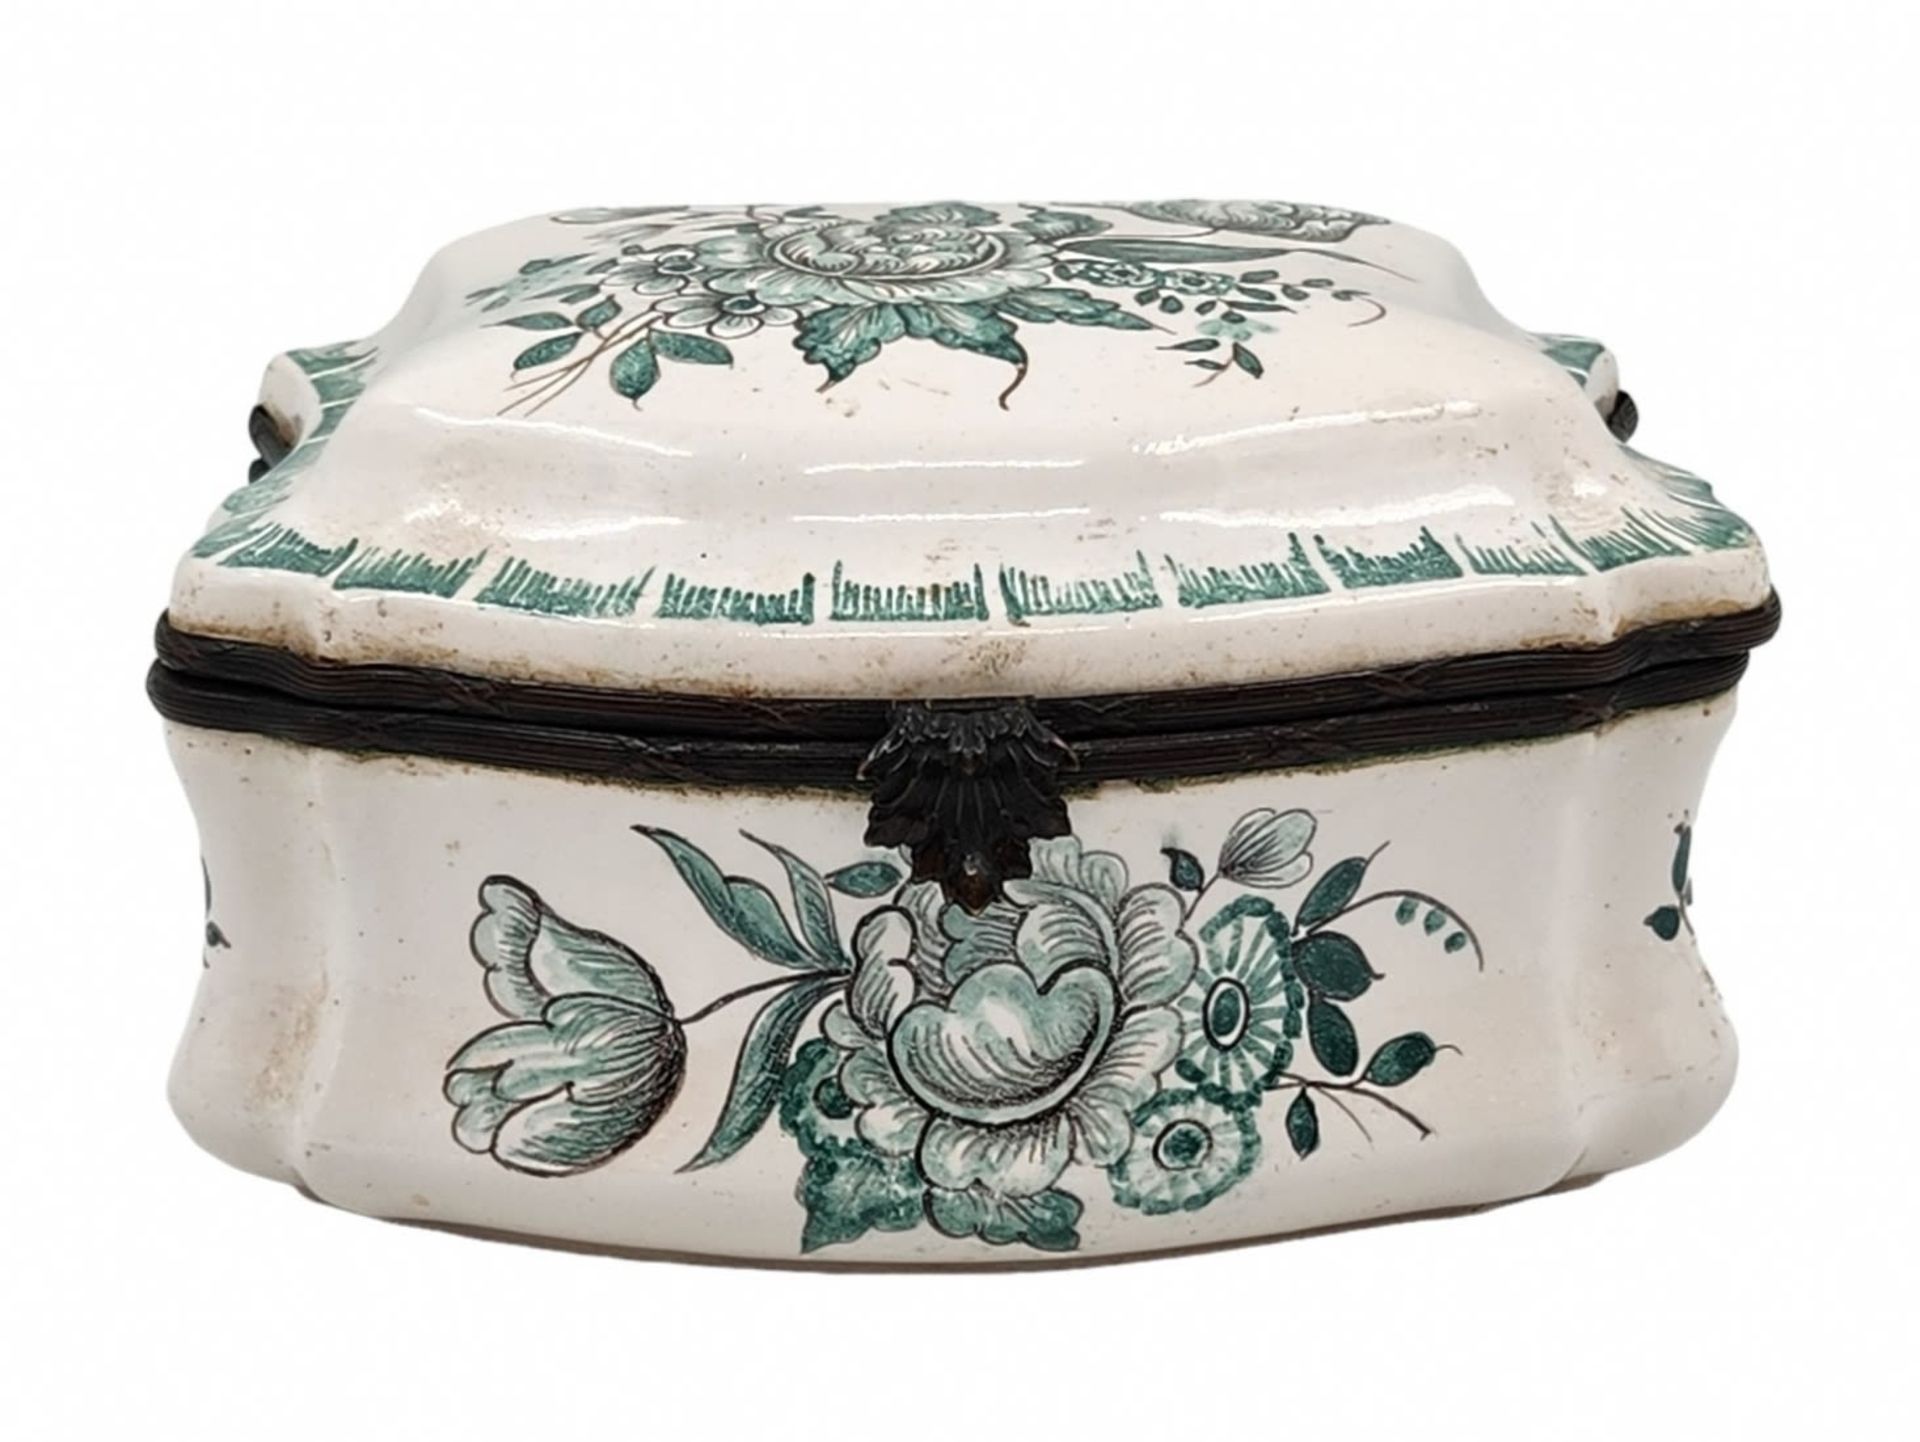 Antique French box, includes a matching lid, made of faience and metal devices, decorated with